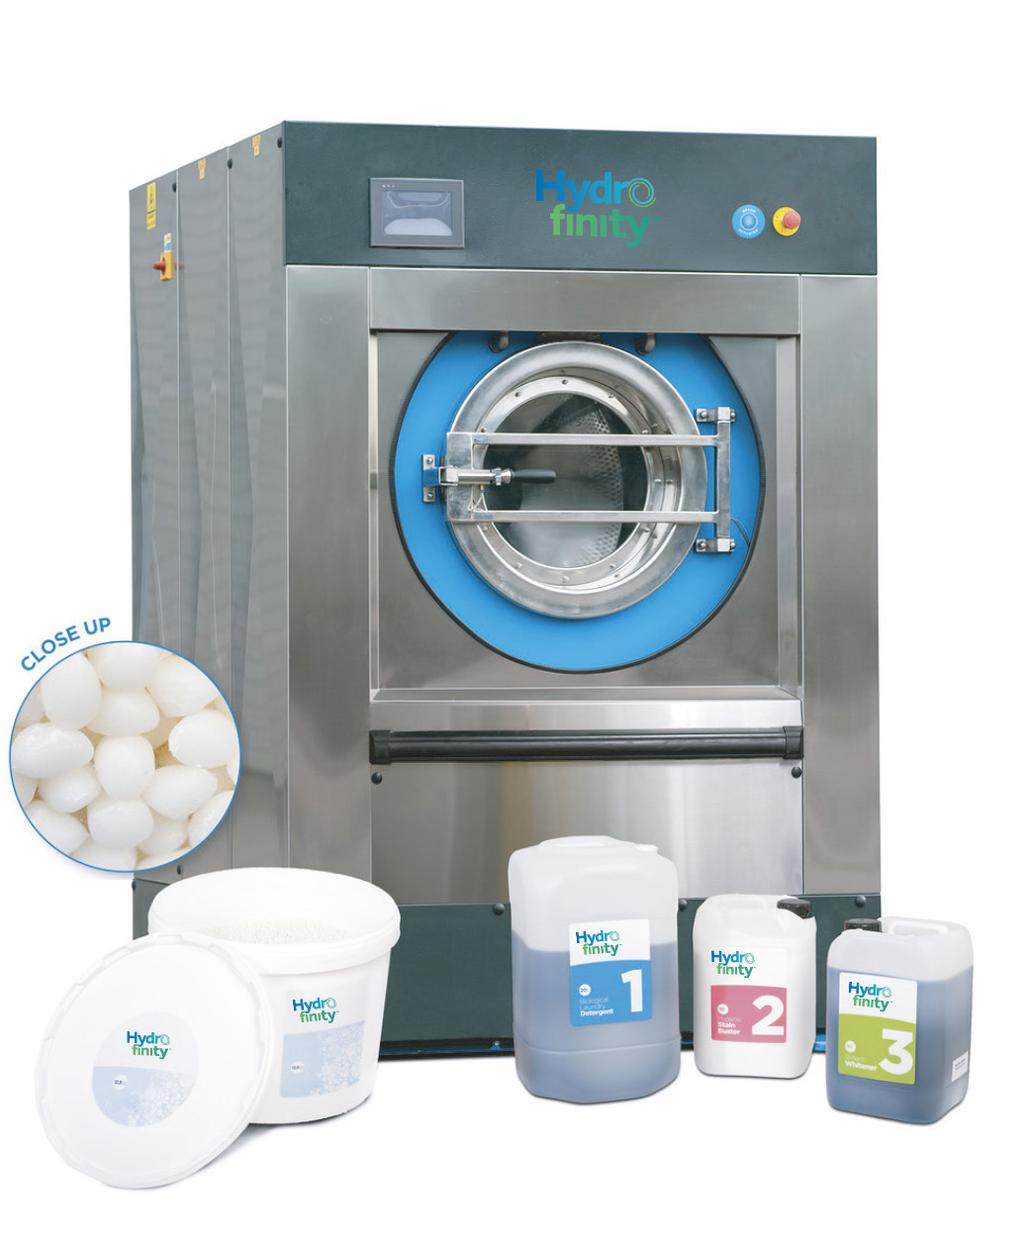 Product Range Washing Extractors 36kg & 20kg capacity models Product Features: - Patented polymer washing system - High speed extract - Large, easy-to-load drum - Easy-to-clean lint filter - Soft